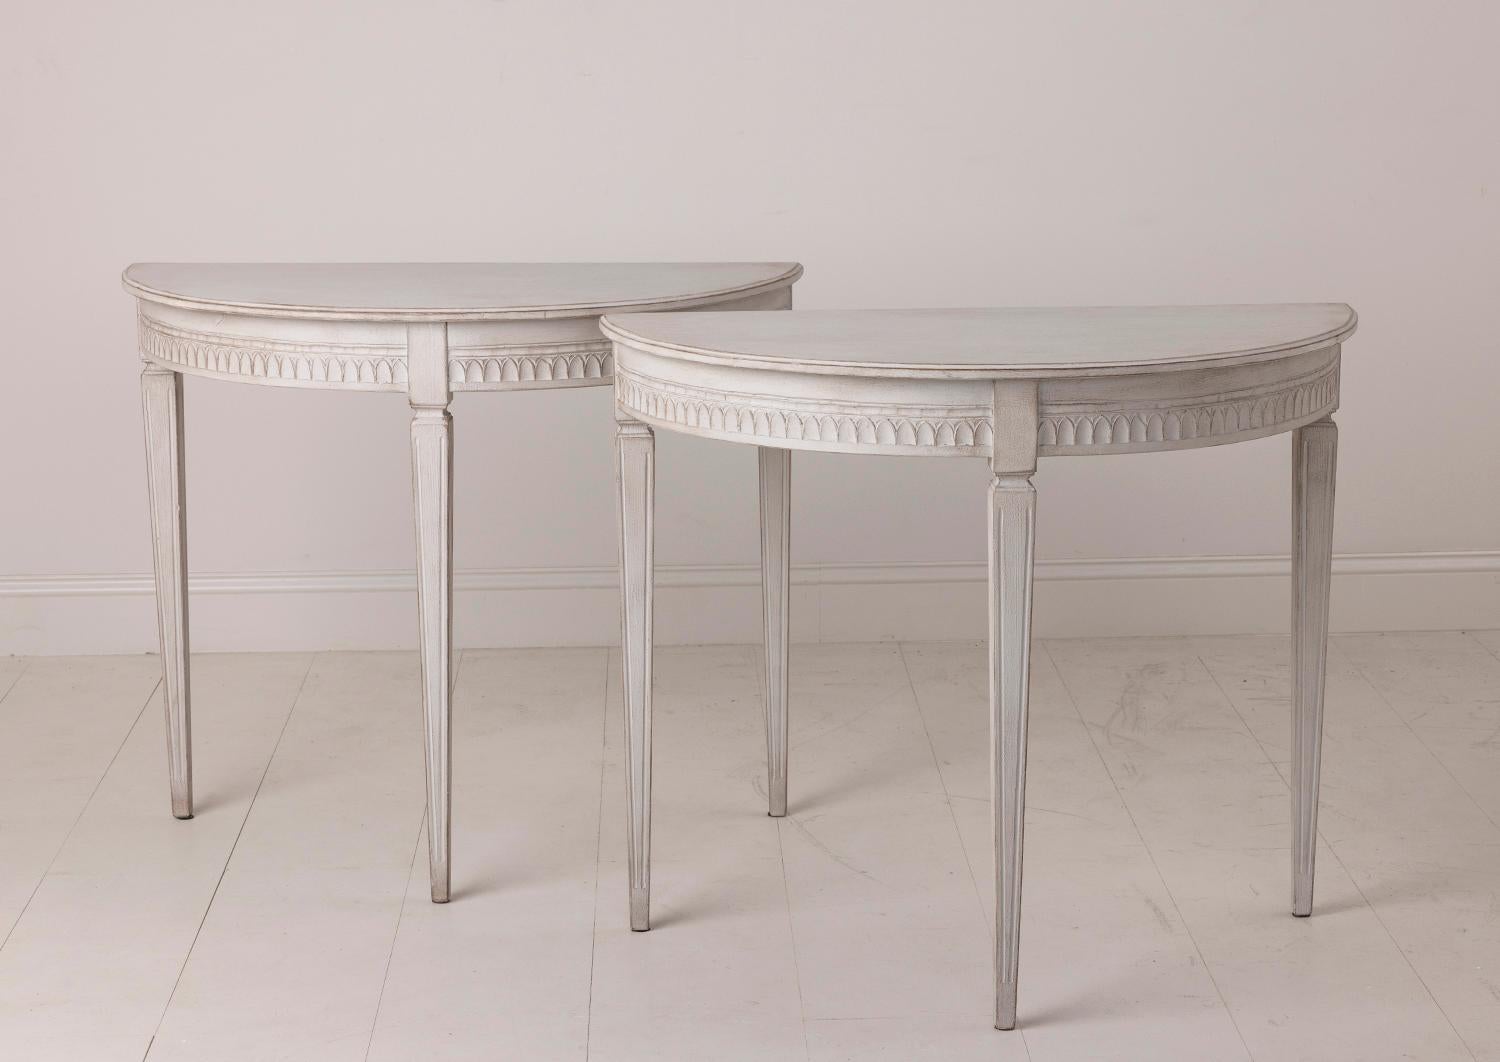 A petite pair of Swedish Gustavian Style demilune console tables from the 19th century. The tables feature lamb's tongue carving on the apron; raised on square, tapered, and fluted legs. These demilune tables would make beautiful hall or bedside